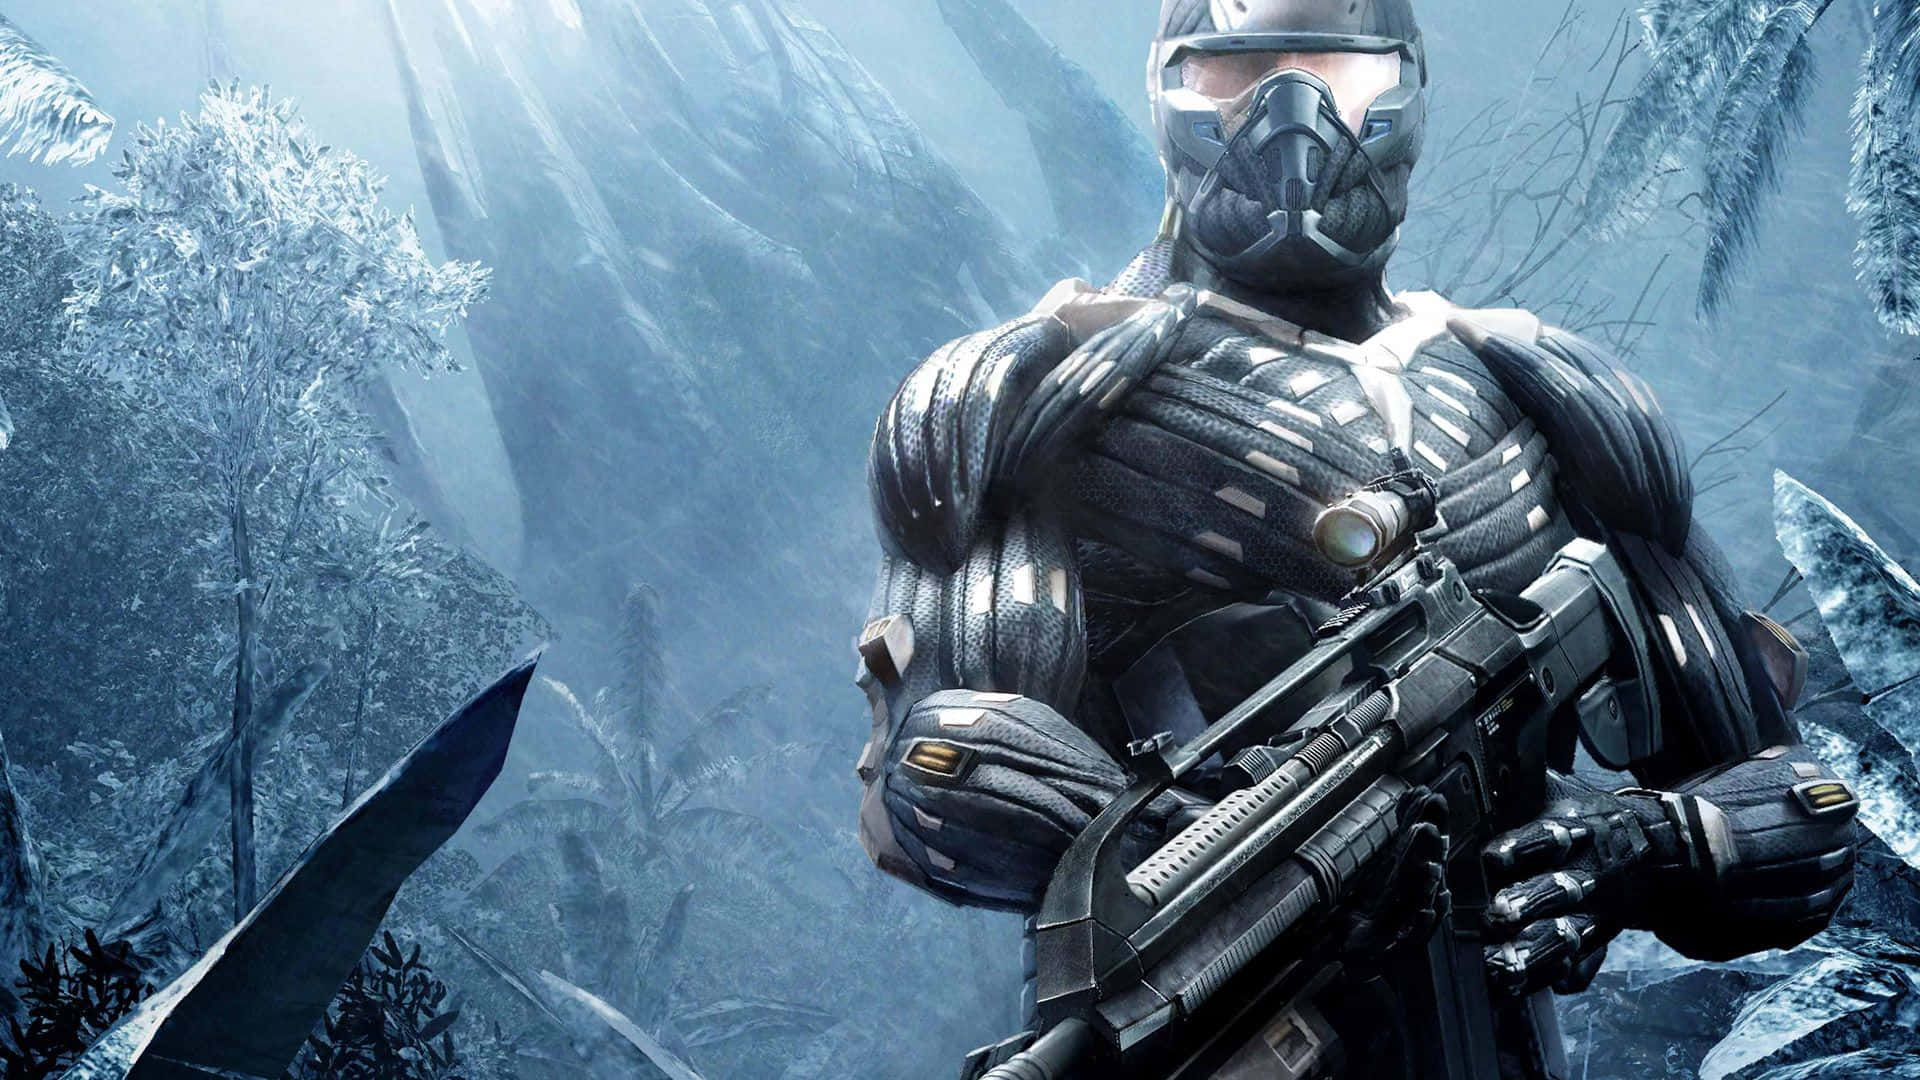 A Sneaking Soldier in the middle of a Battle Zone in Crysis HD Wallpaper